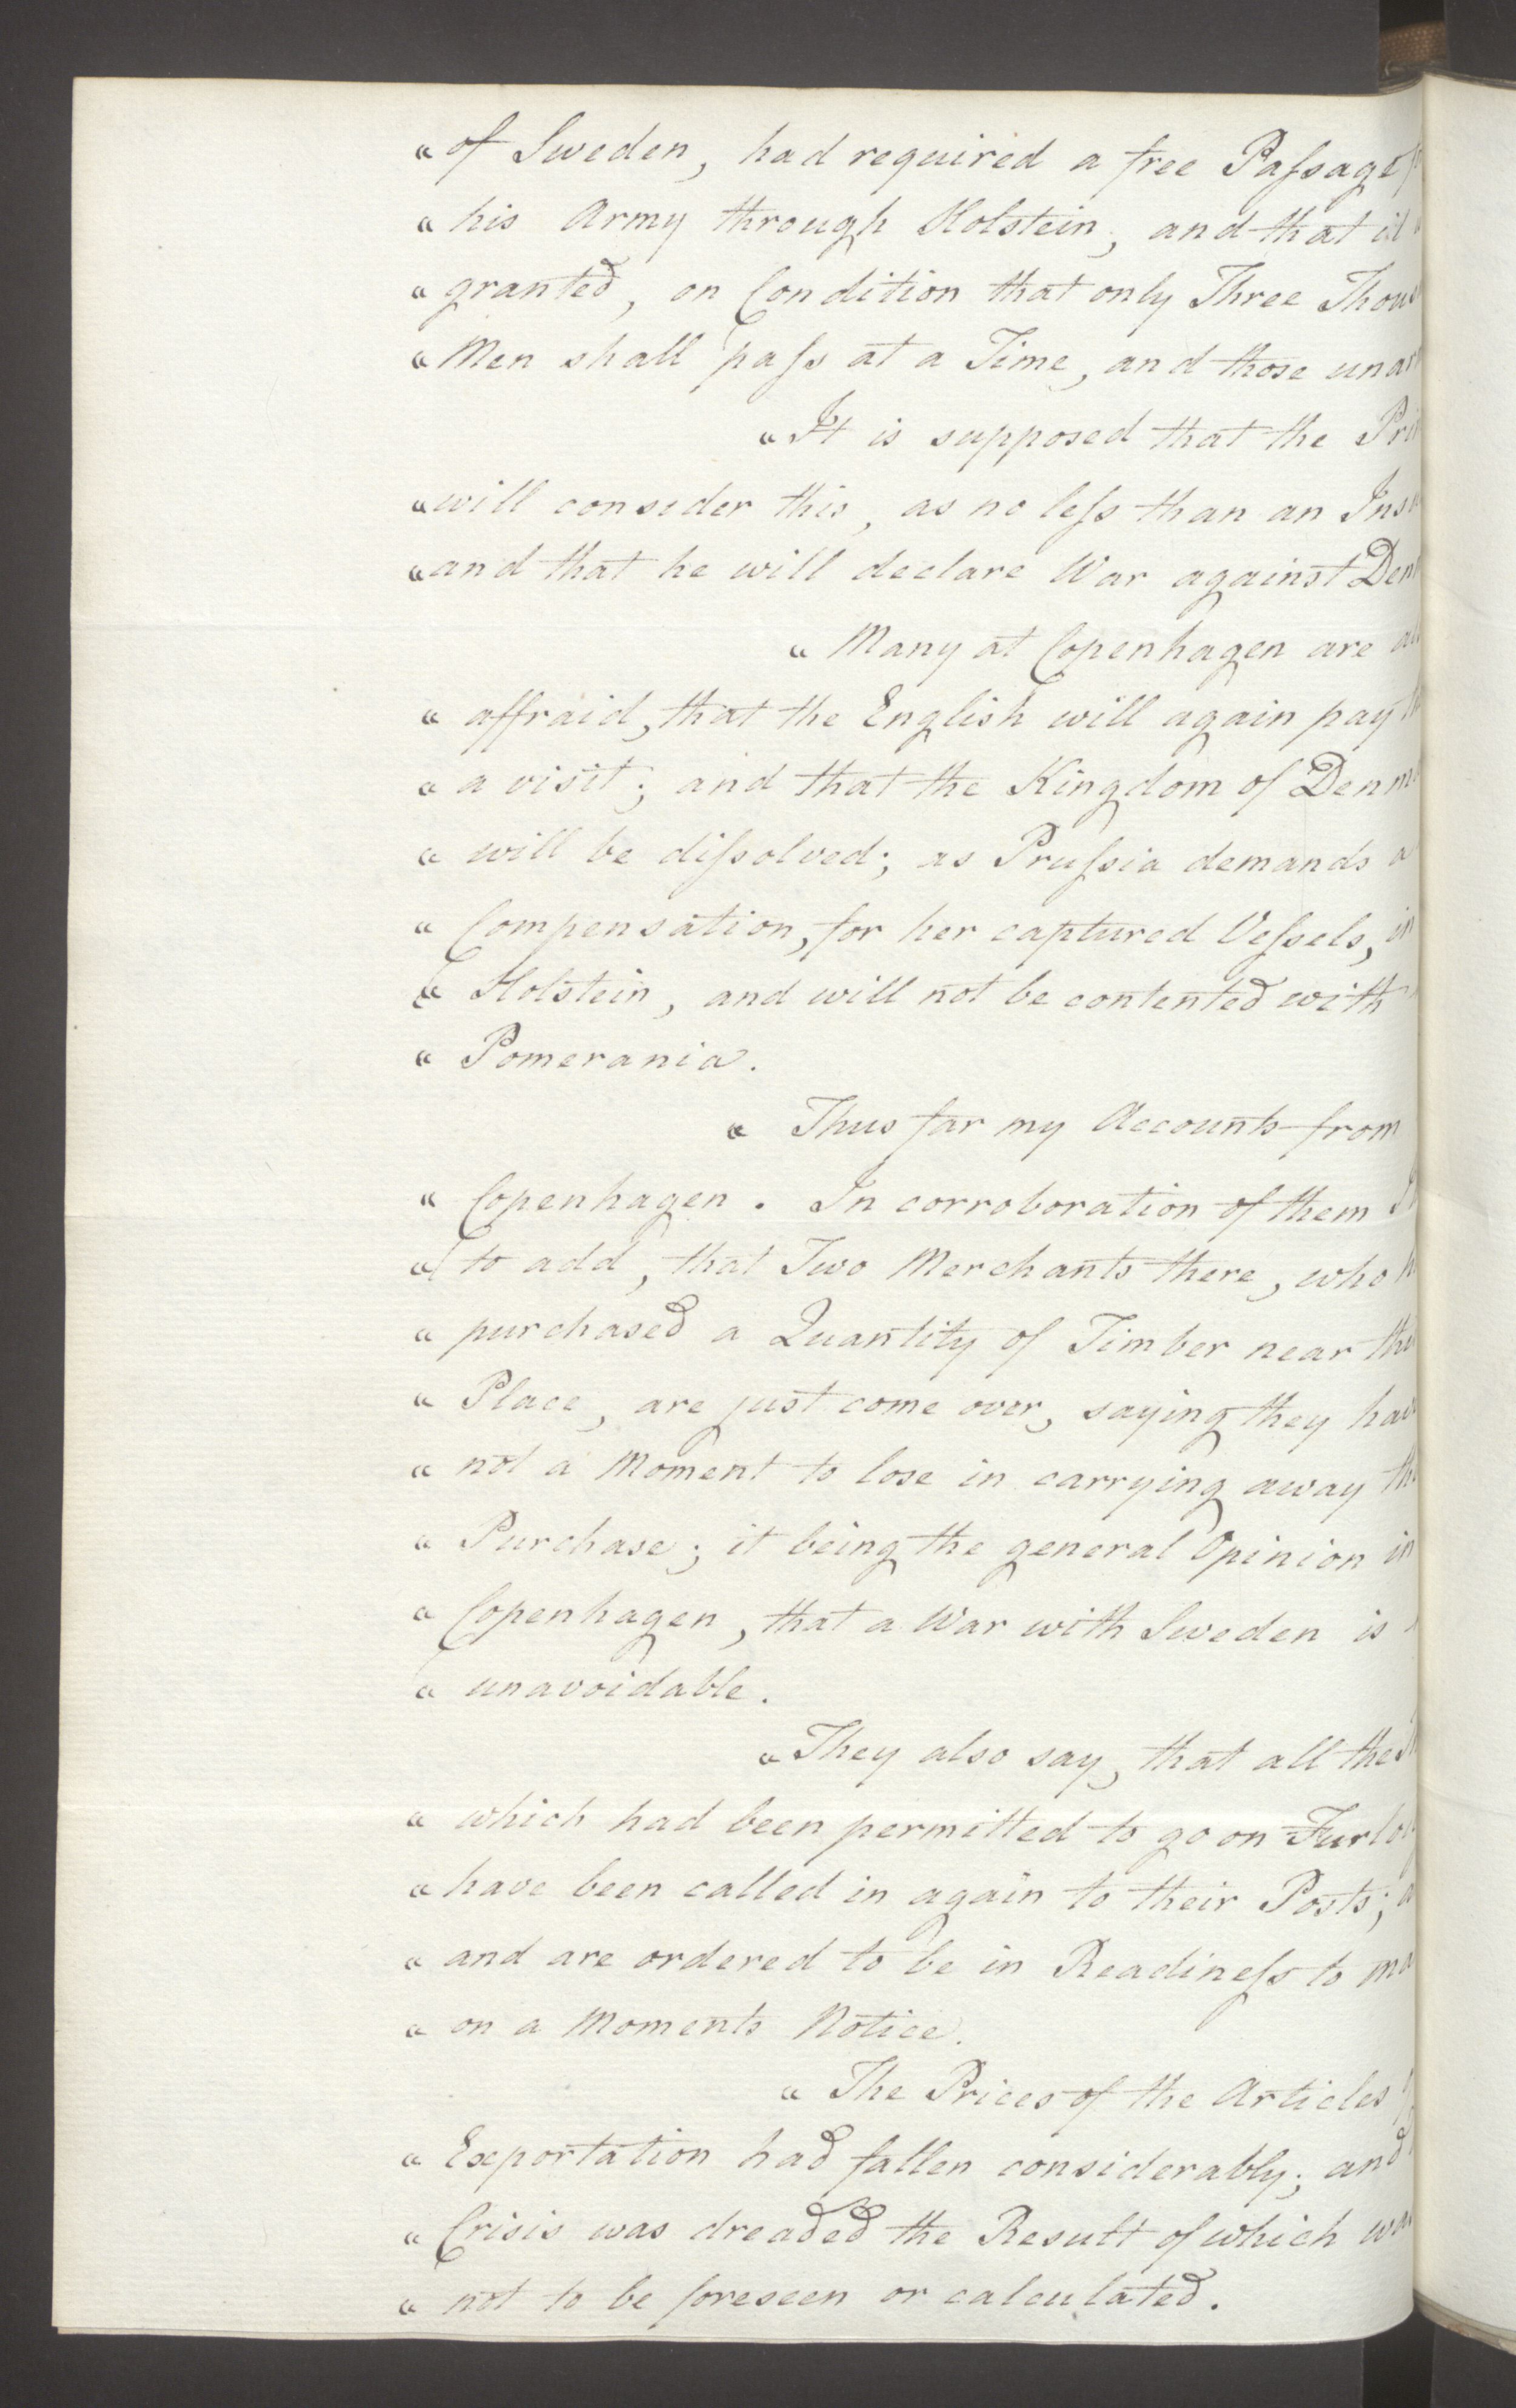 Foreign Office*, UKA/-/FO 38/16: Sir C. Gordon. Reports from Malmö, Jonkoping, and Helsingborg, 1814, p. 54